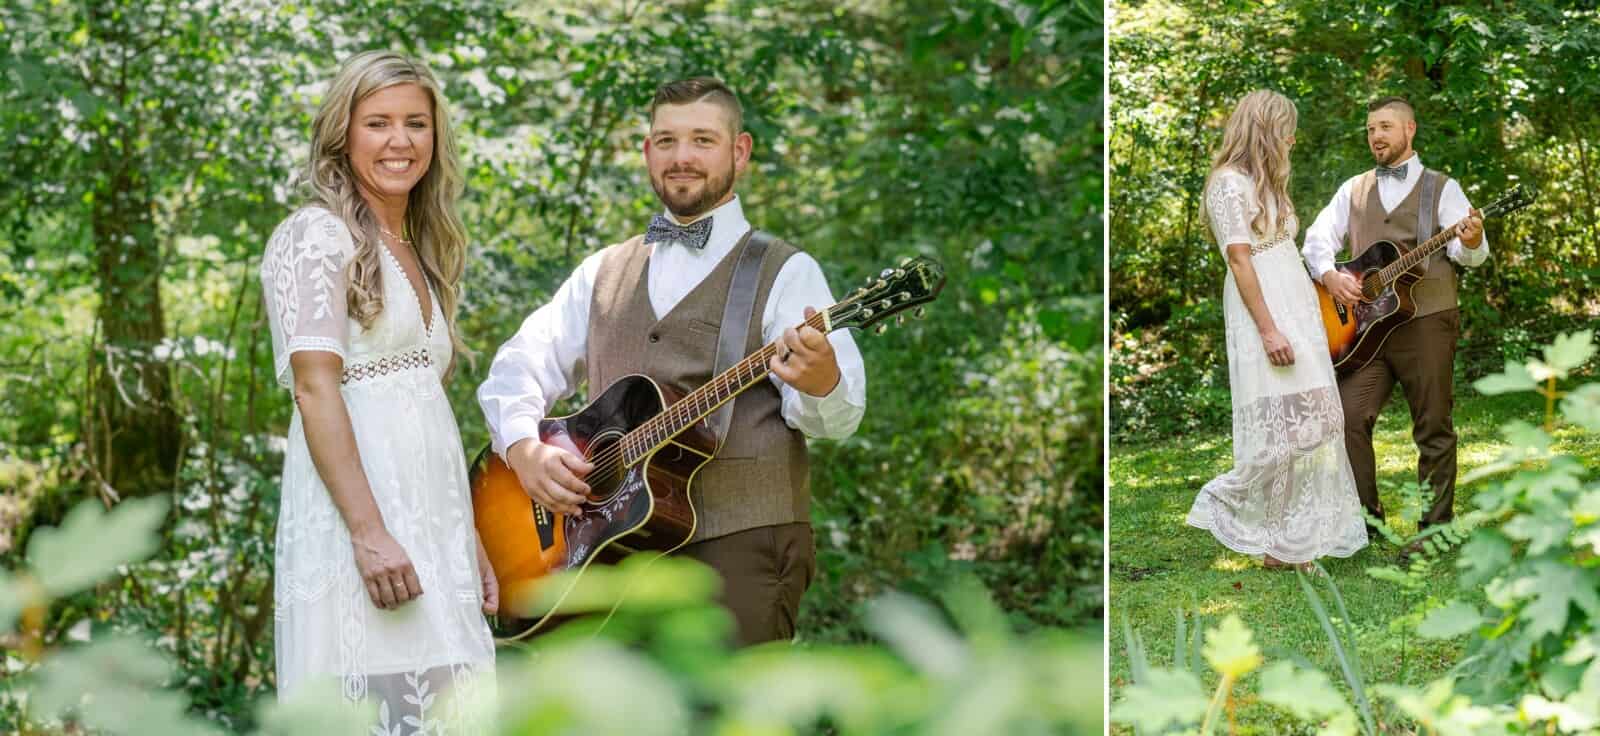 Groom strums guitar for bride in lace dress under sunny trees